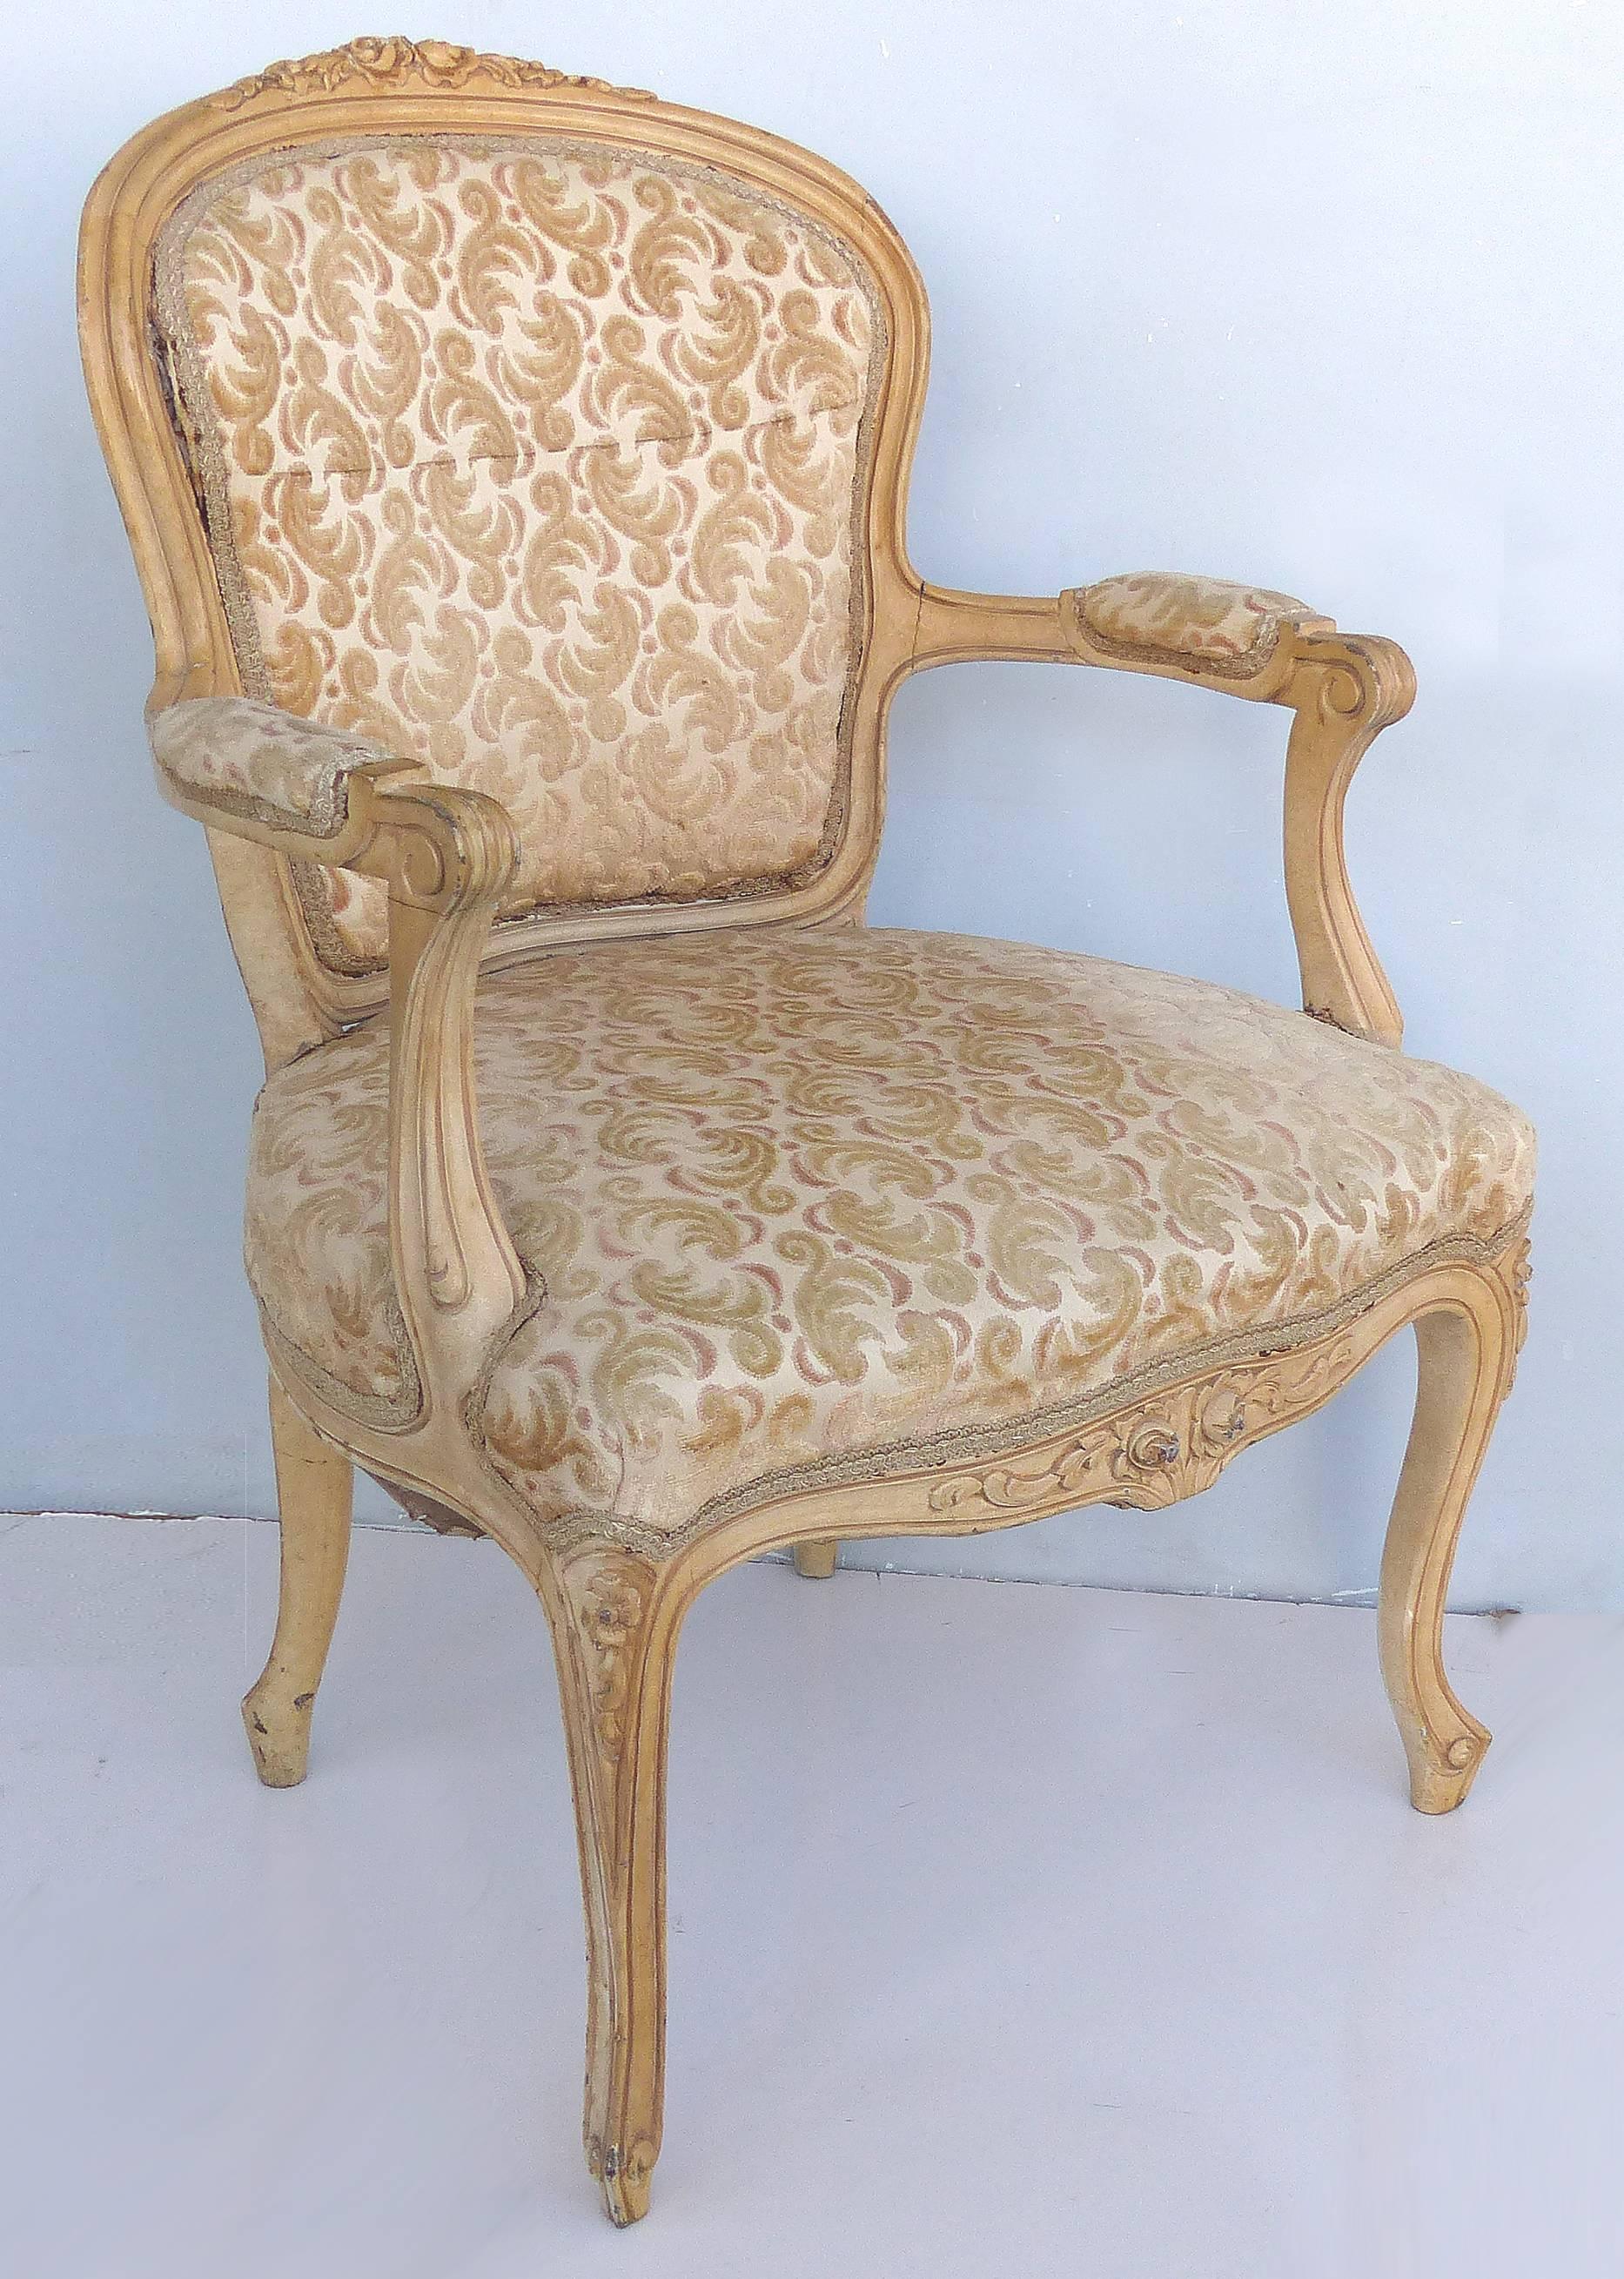 19th Century Louis XV Style Provincial Fauteuil Armchairs with Velvet Upholstery, Pair